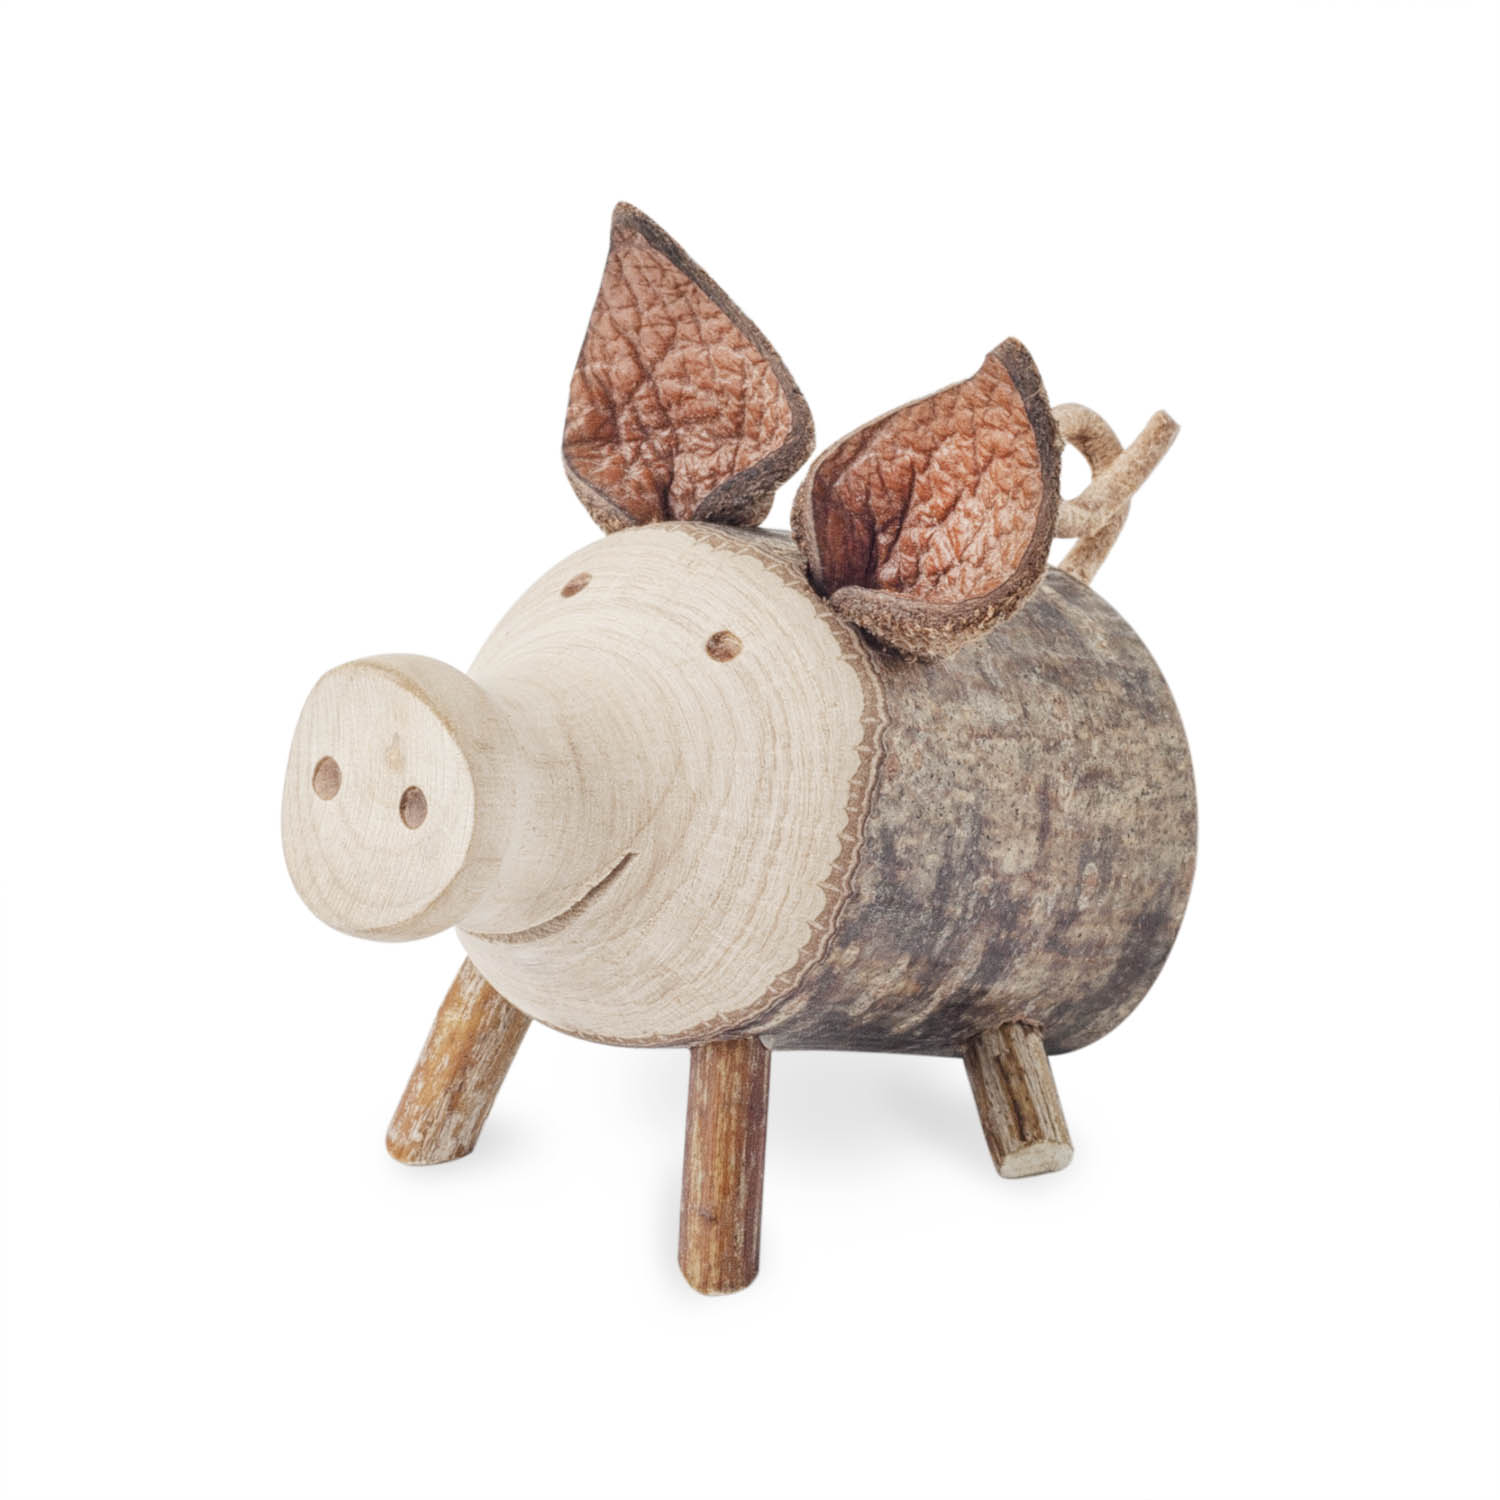 Wooden Pig Figurine For Home Decor